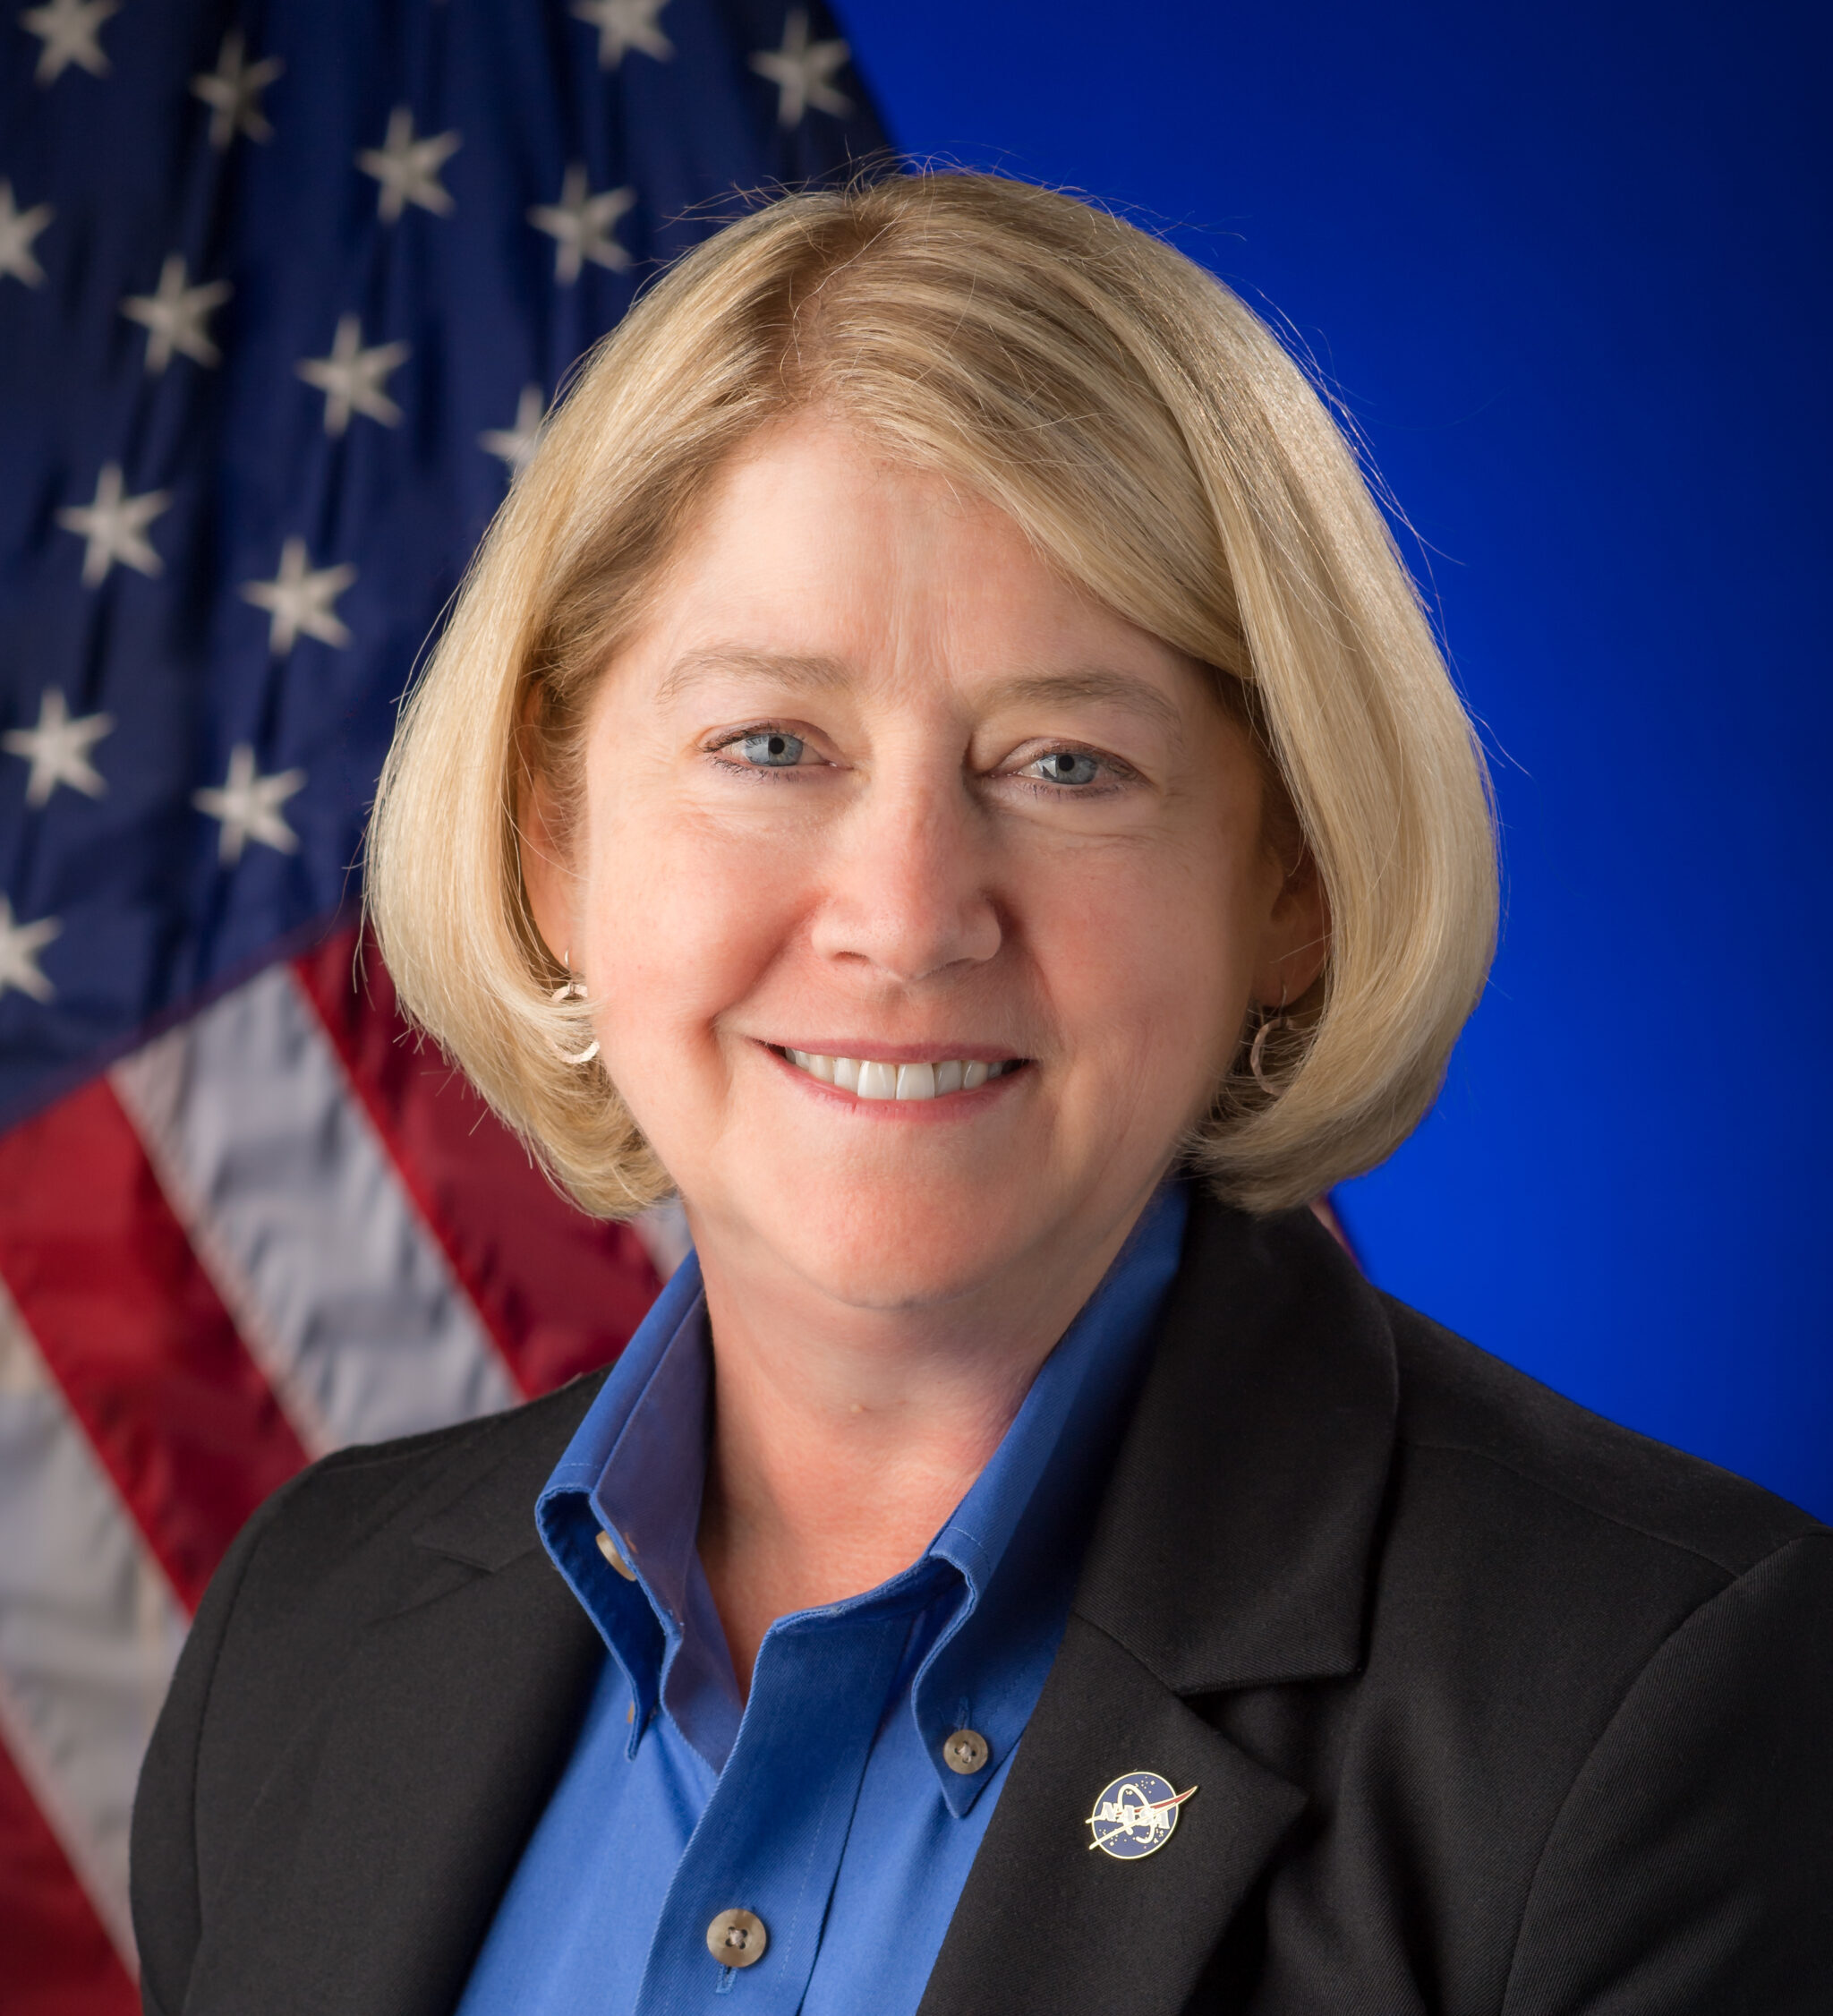 WSBR April Luncheon Featuring NASA Deputy Administrator and Former Astronaut, Pam Melroy